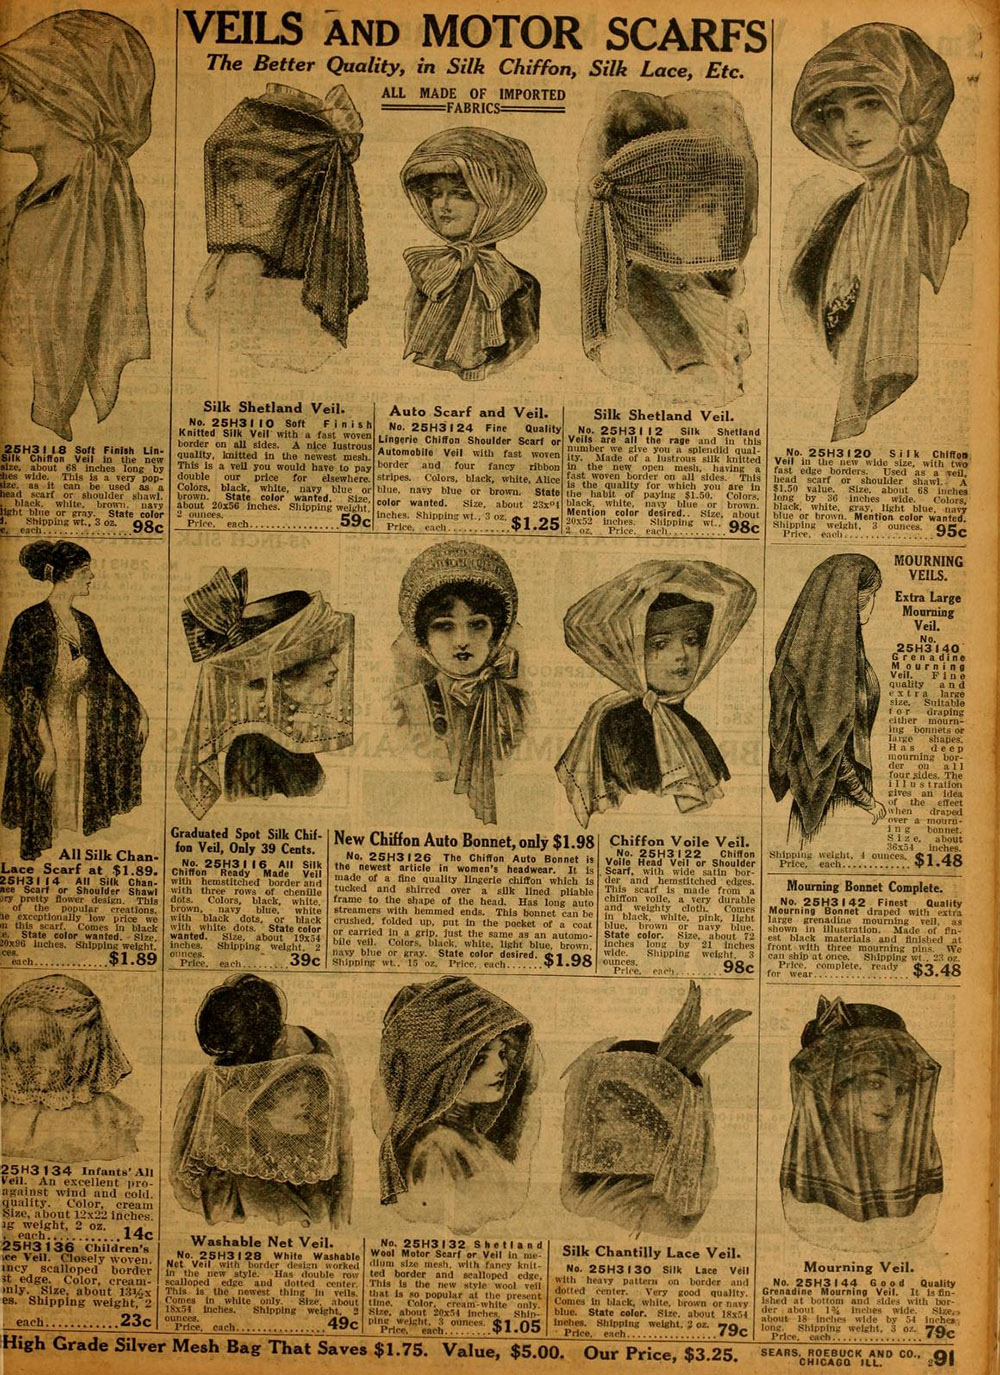 motor scarves for ladeis sold in the 1912 sears catalog